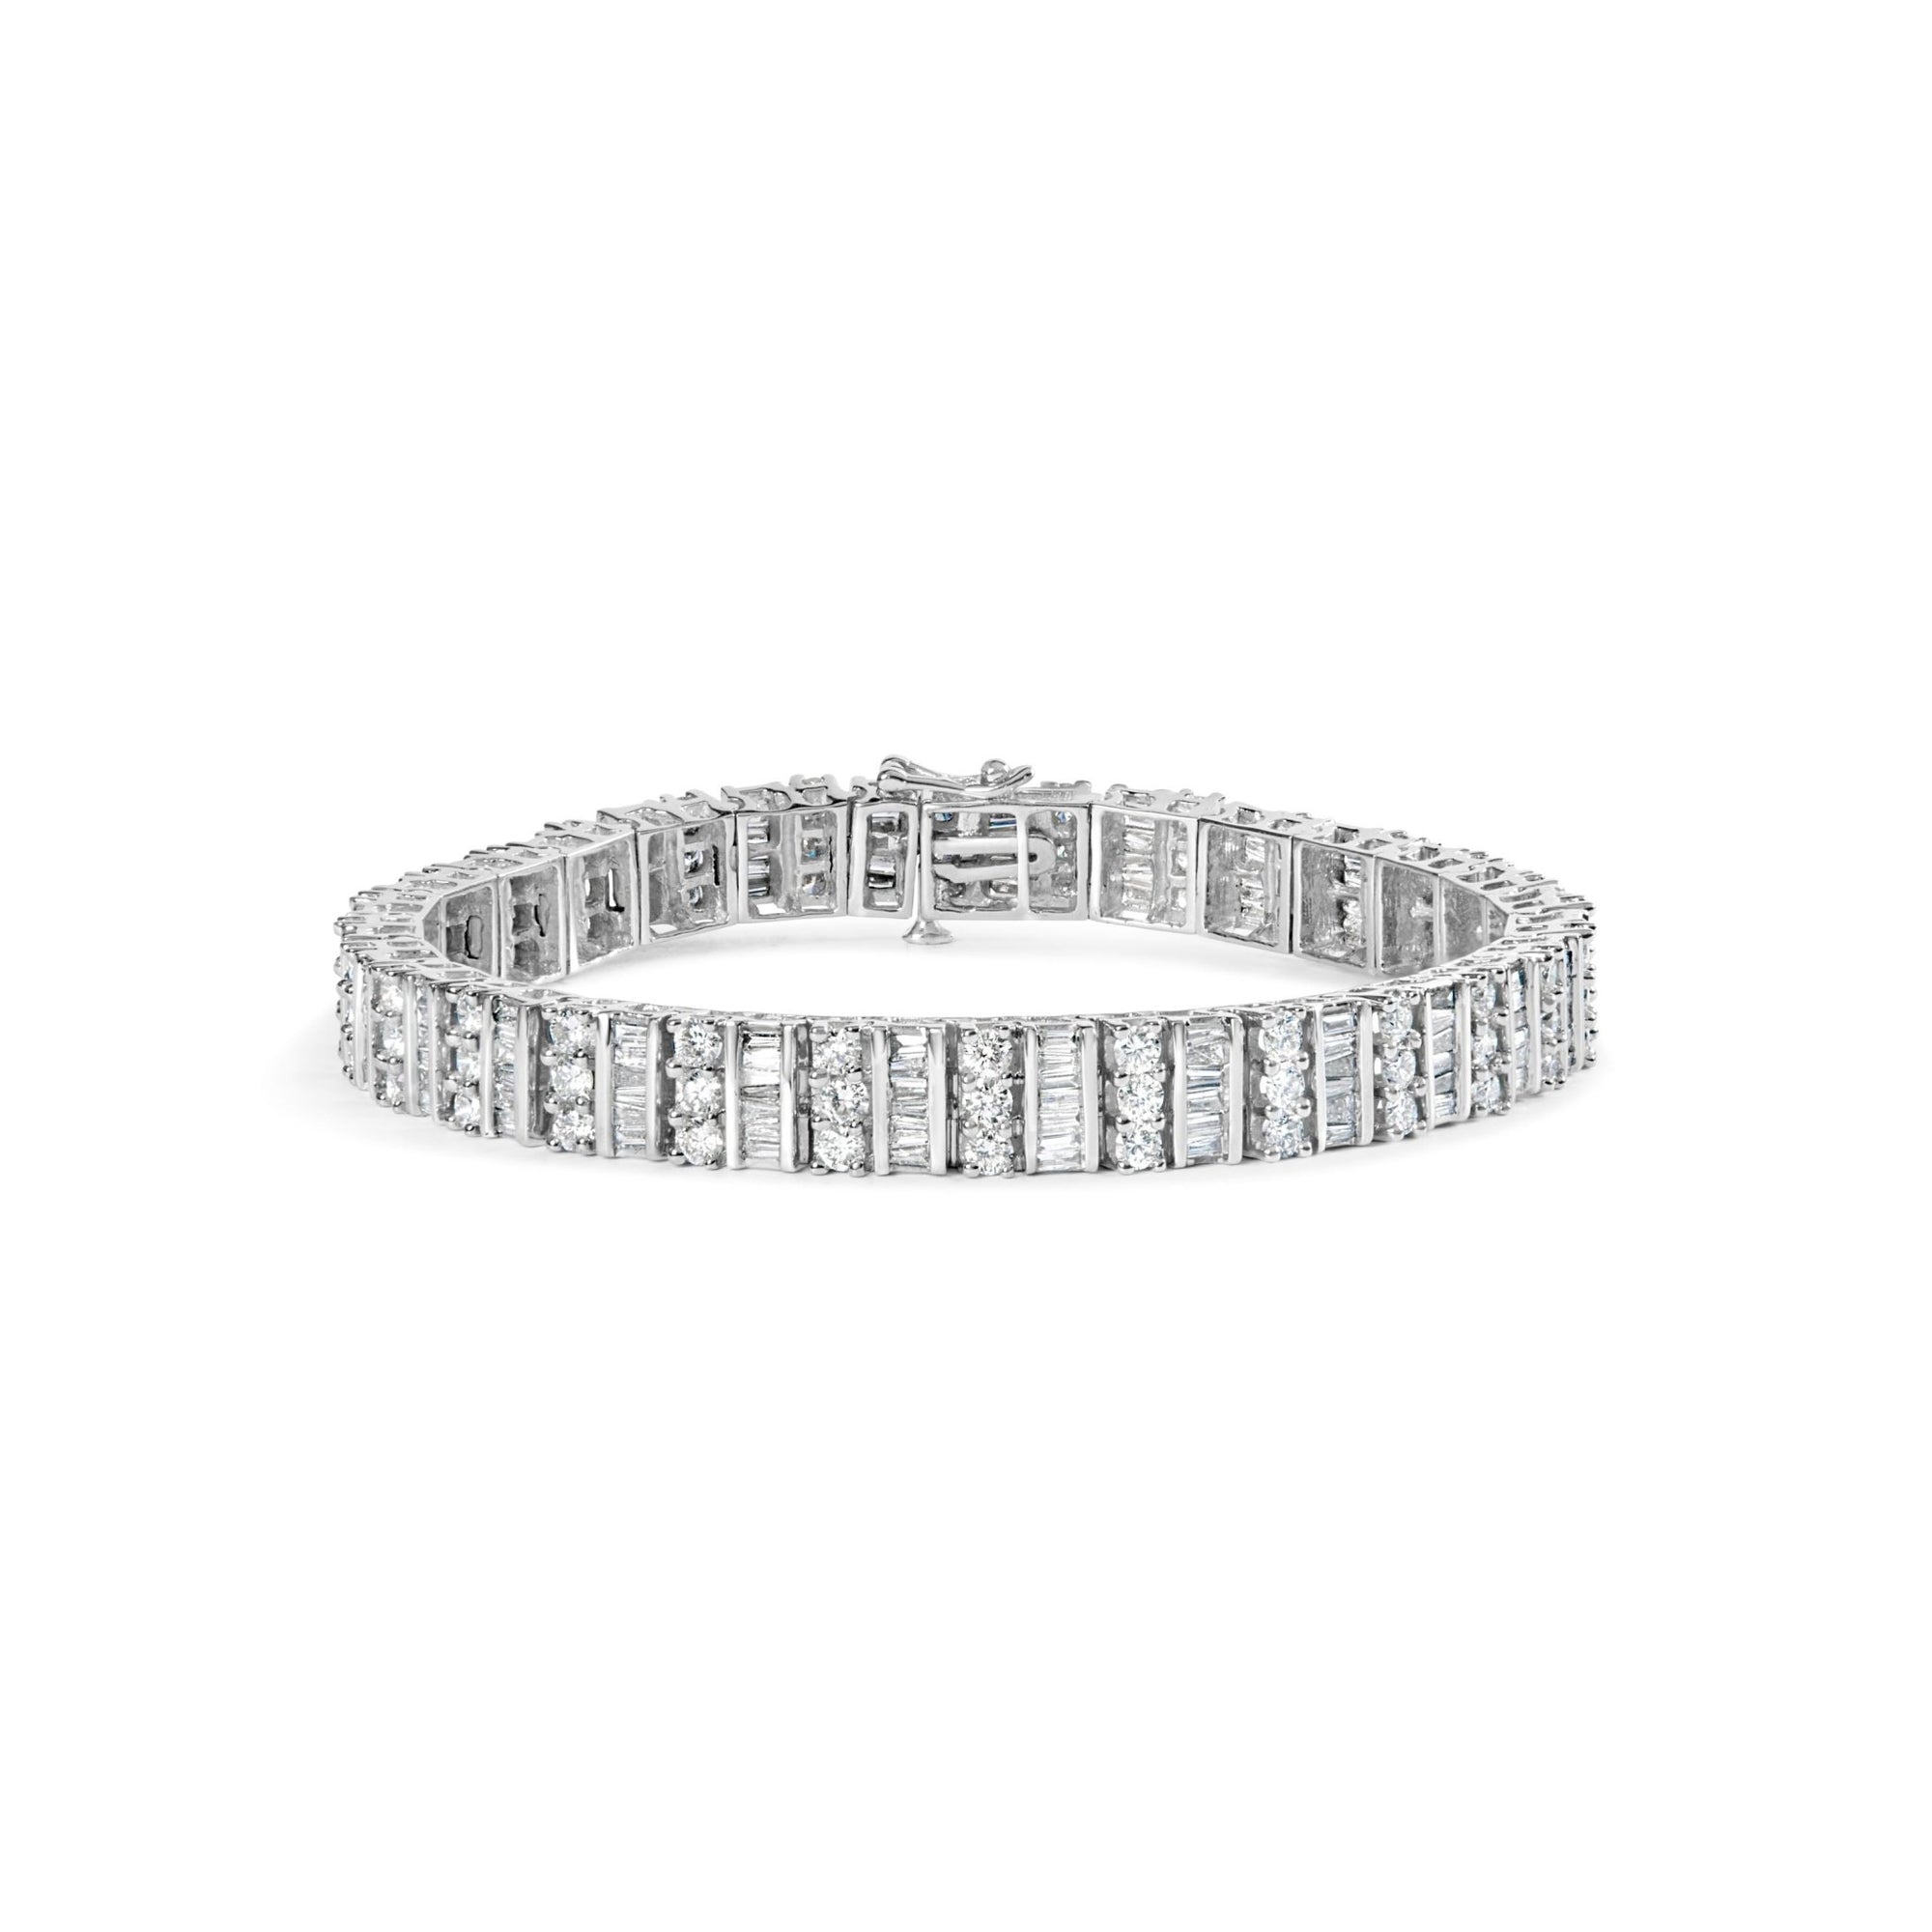 14K White Gold 6.00 Cttw Alternating Round and Baguette Diamond Tennis Bracelet (H-I Color, I1-I2 Clarity) - 7" Inches - LinkagejewelrydesignLinkagejewelrydesign